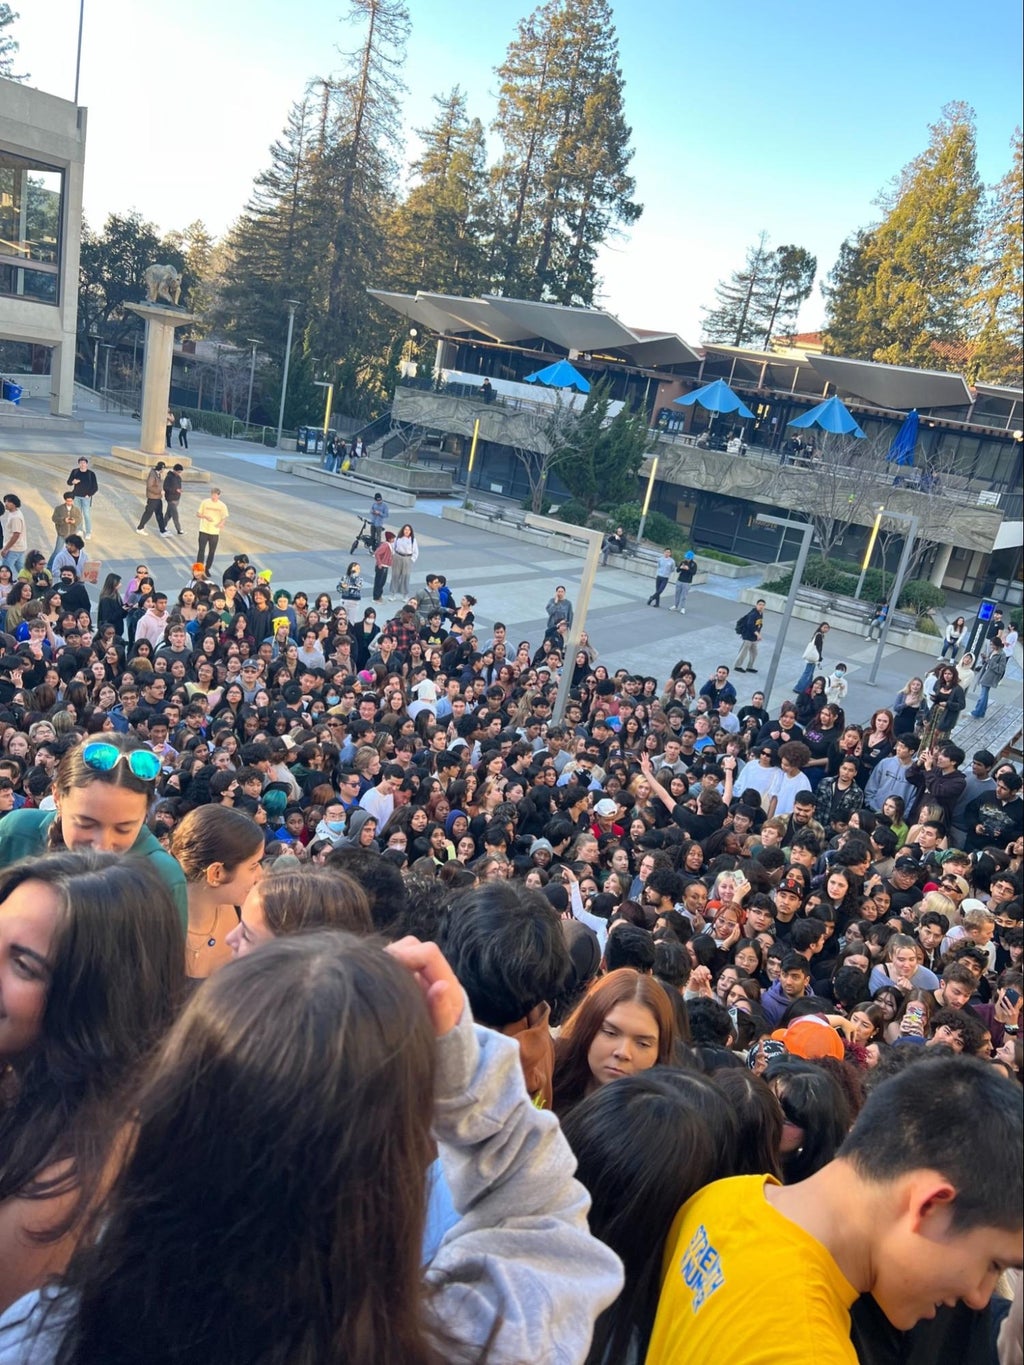 Crowd at Soulja Boy concert on Lower Sproul at UC Berkeley